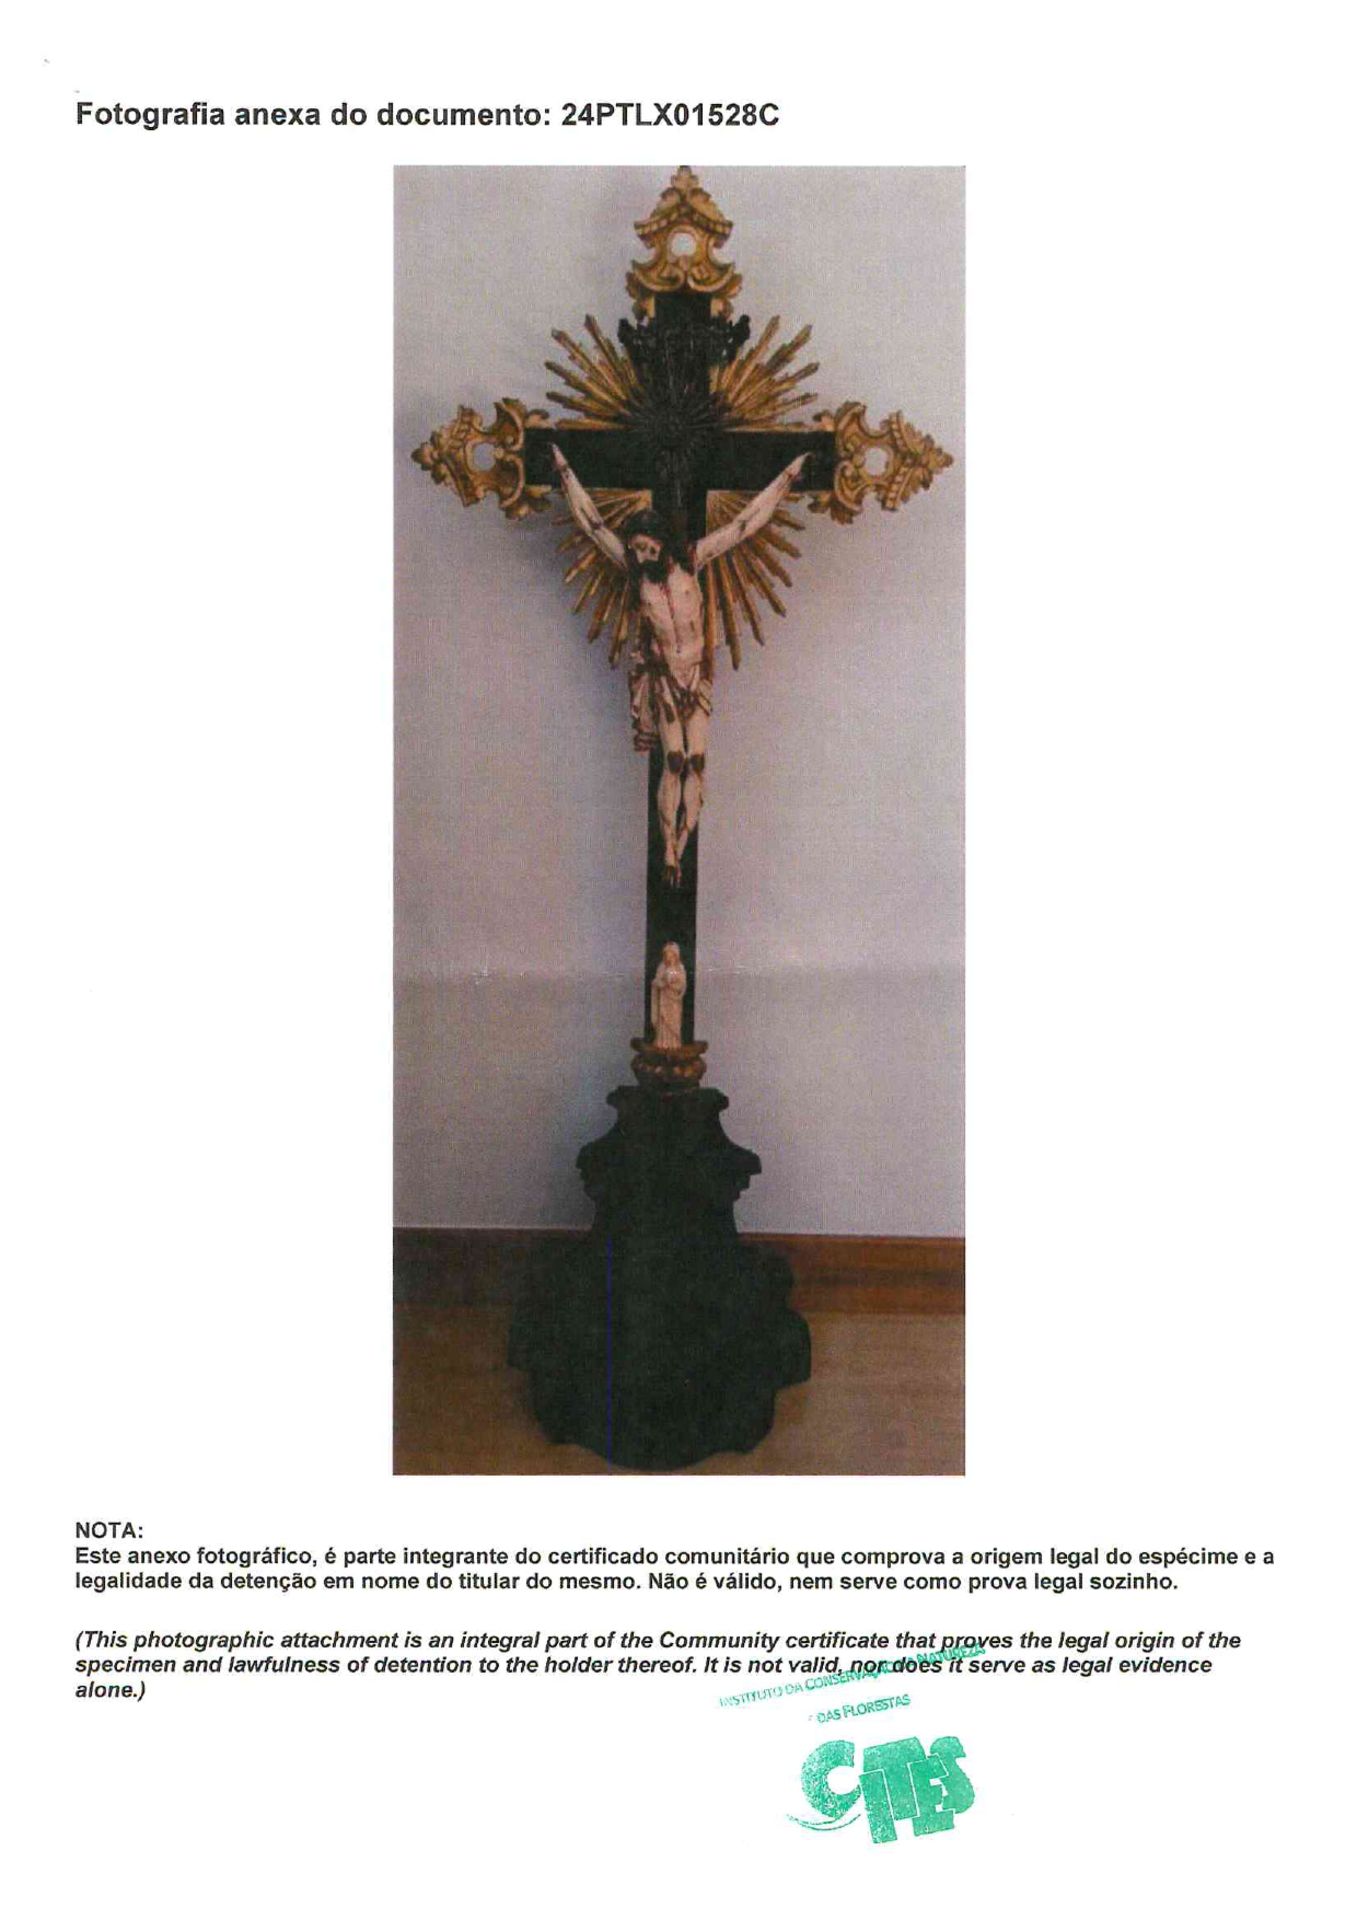 Crucified Christ and Our Lady of Calvary - Bild 6 aus 6